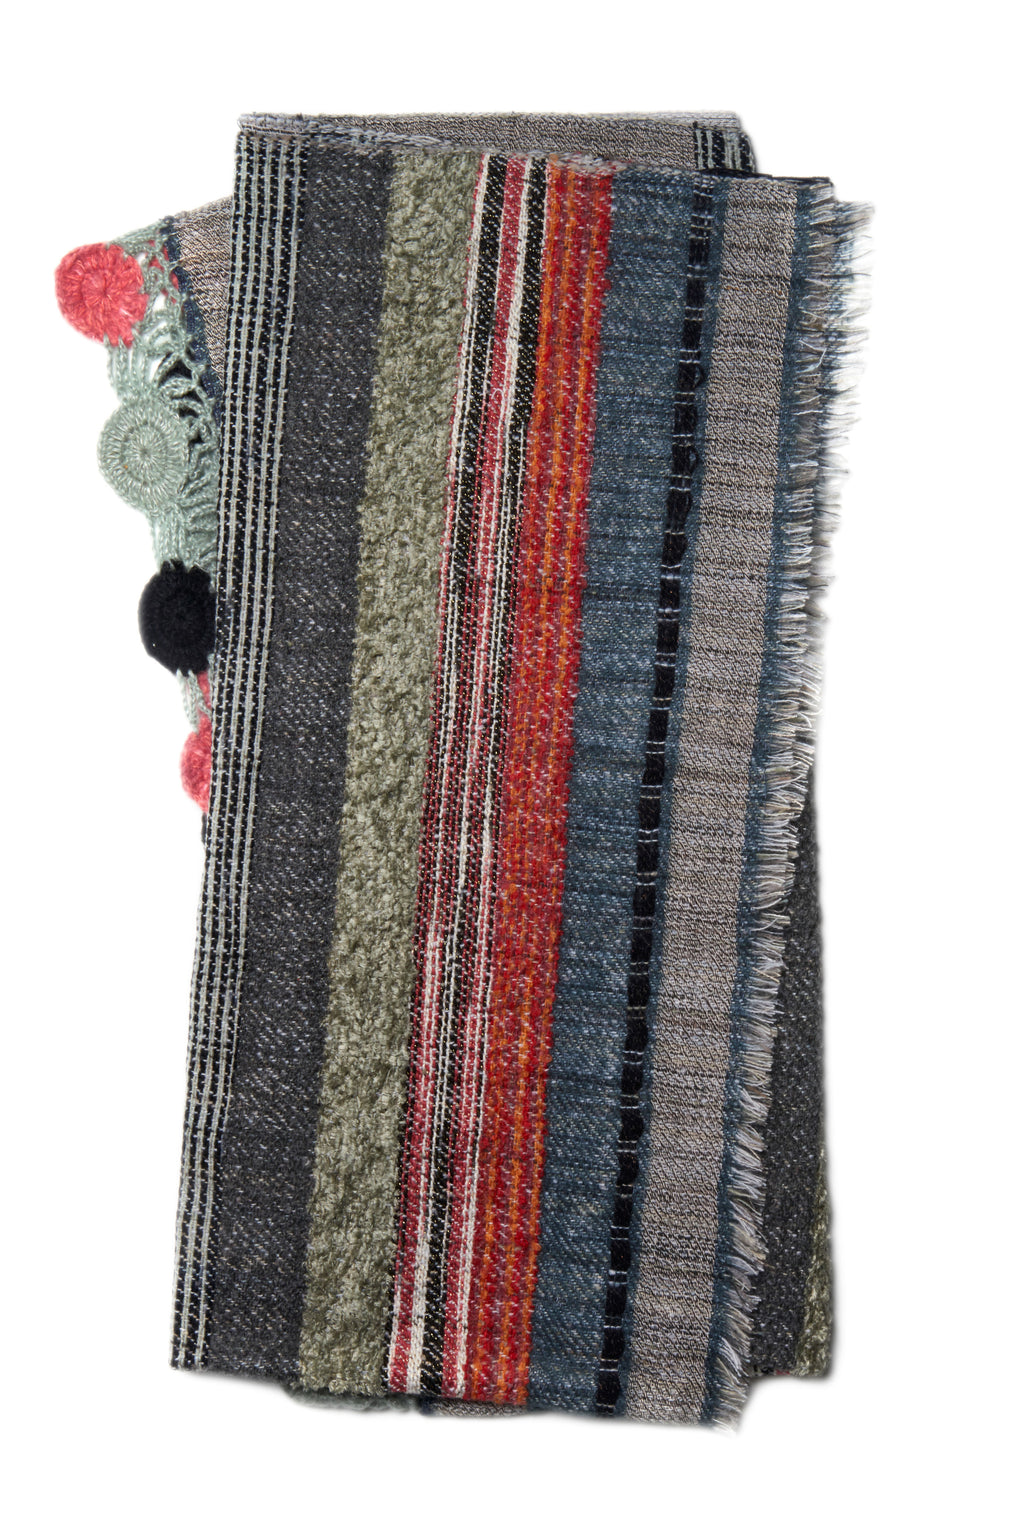 POSY Collection Throw  in  GREY / MULTI